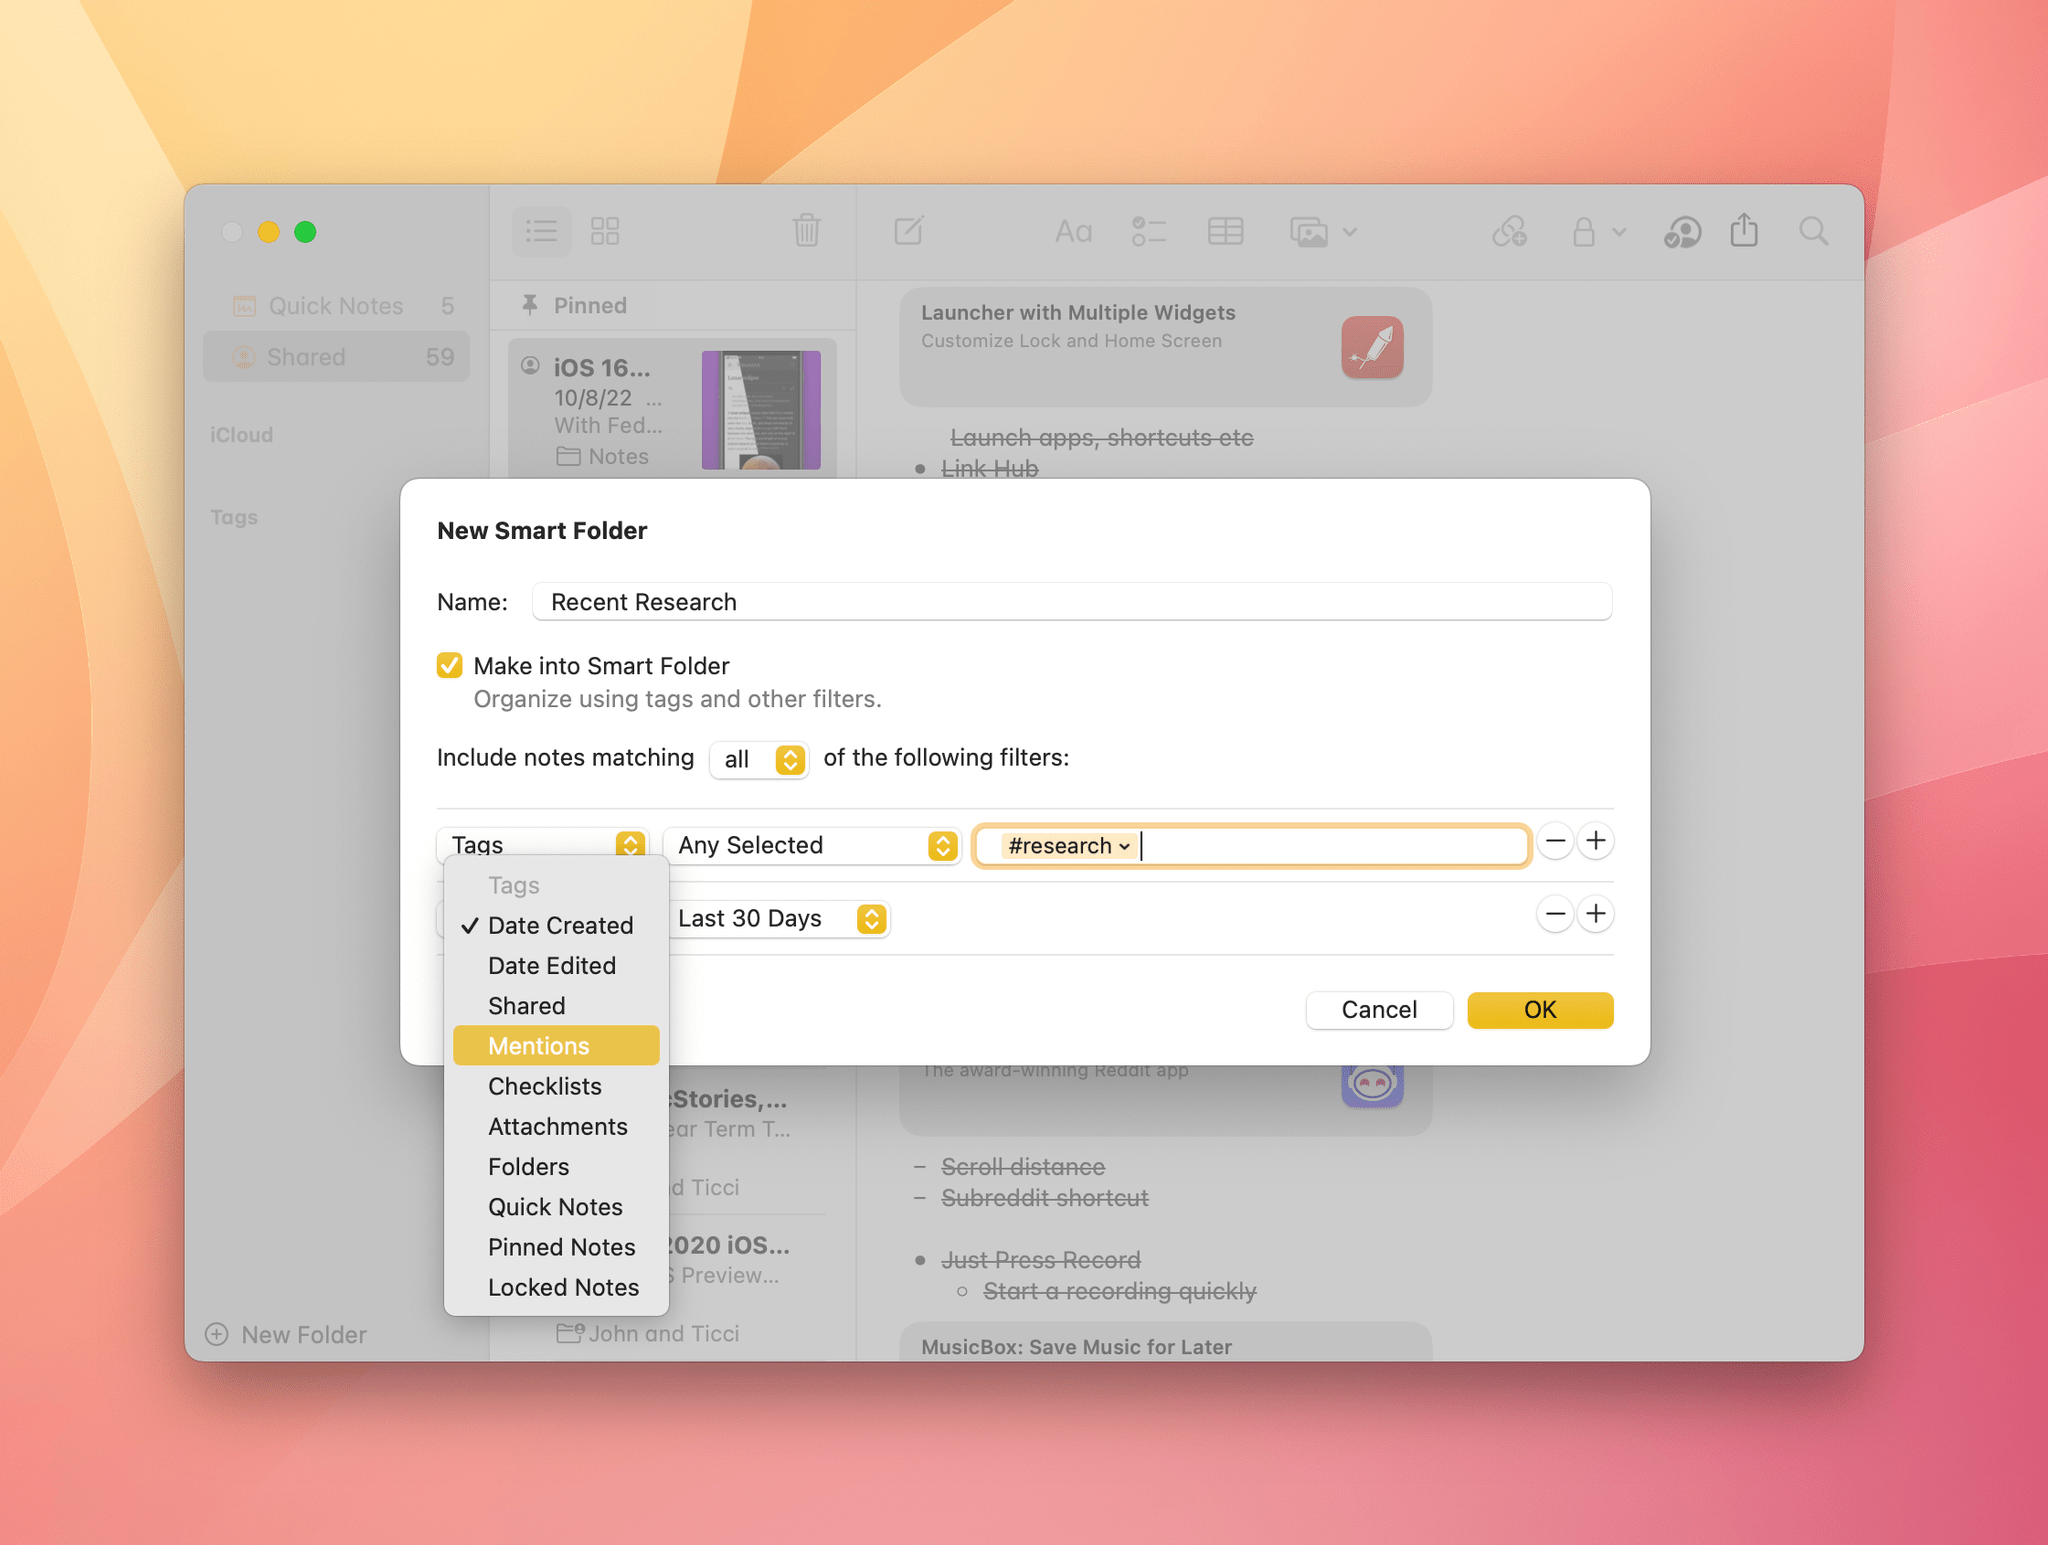 Notes adds a long list of Smart Folder filters.